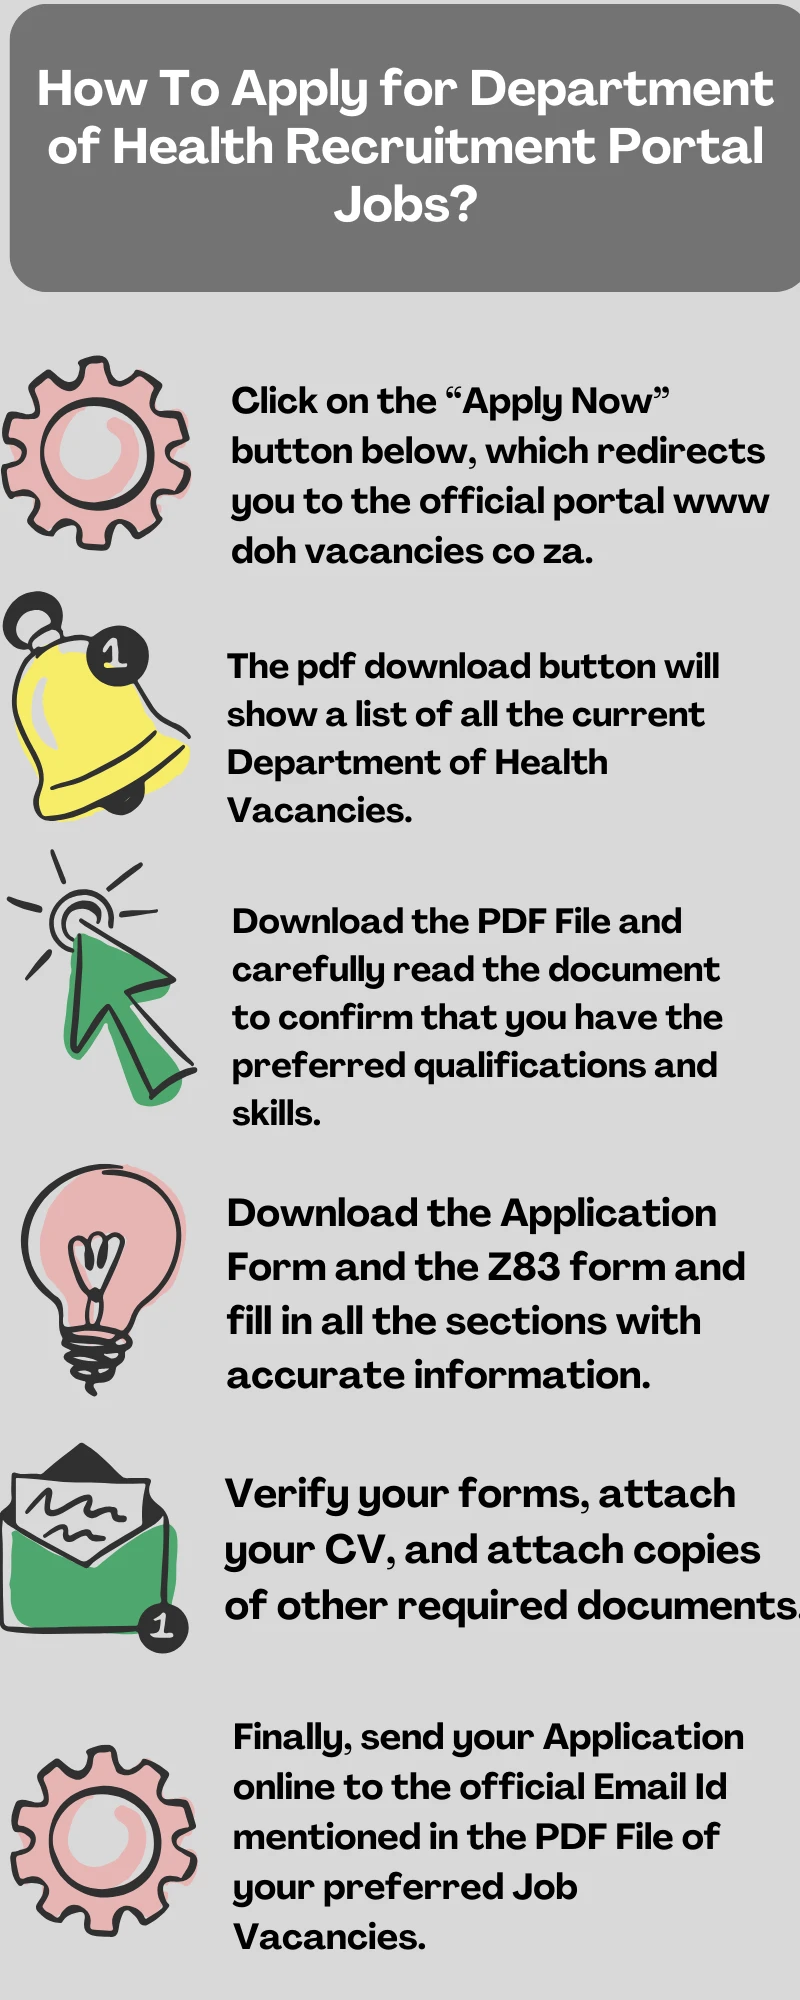 How To Apply for Department of Health Recruitment Portal Jobs?